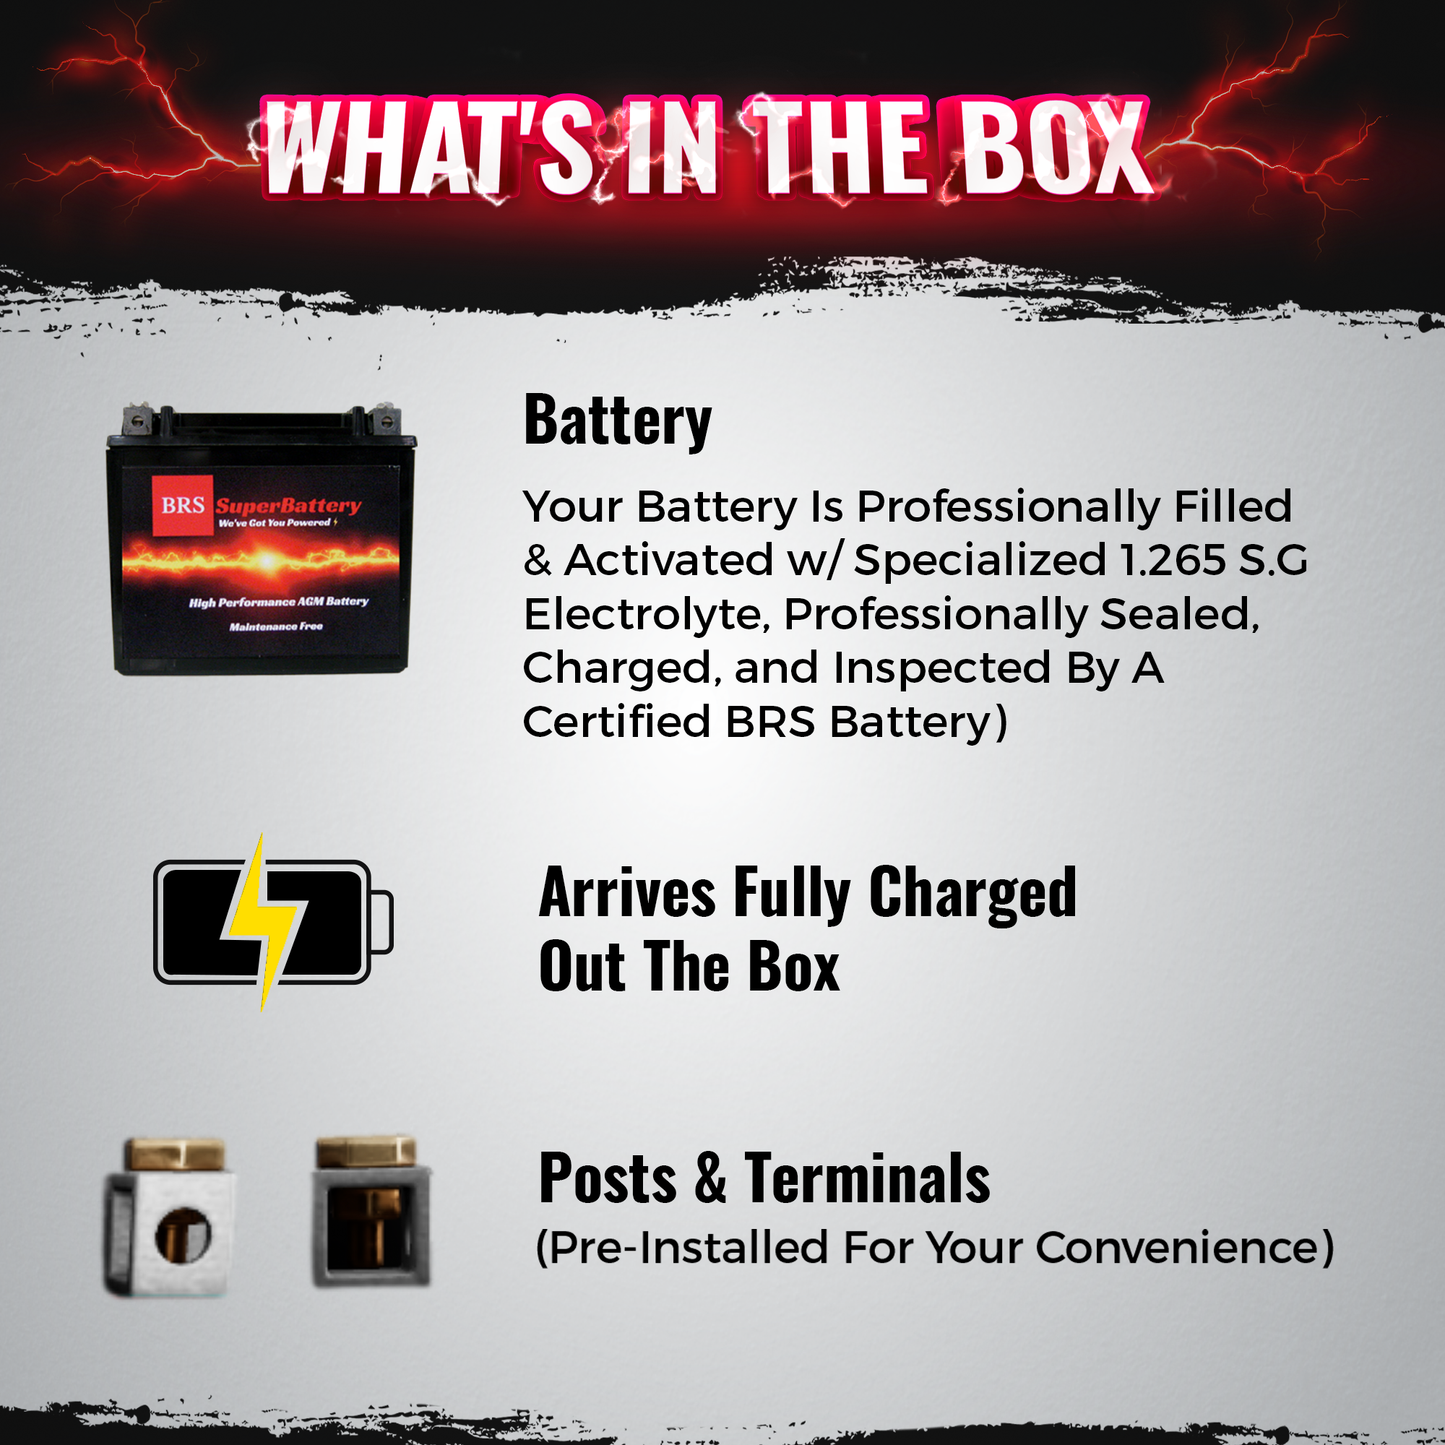 High Performance BRS14AH-BS 10 Year Battery & Smart Charger / Maintainer Combo Bundle Kit 12v Sealed AGM PowerSports Battery - BRS Super Battery